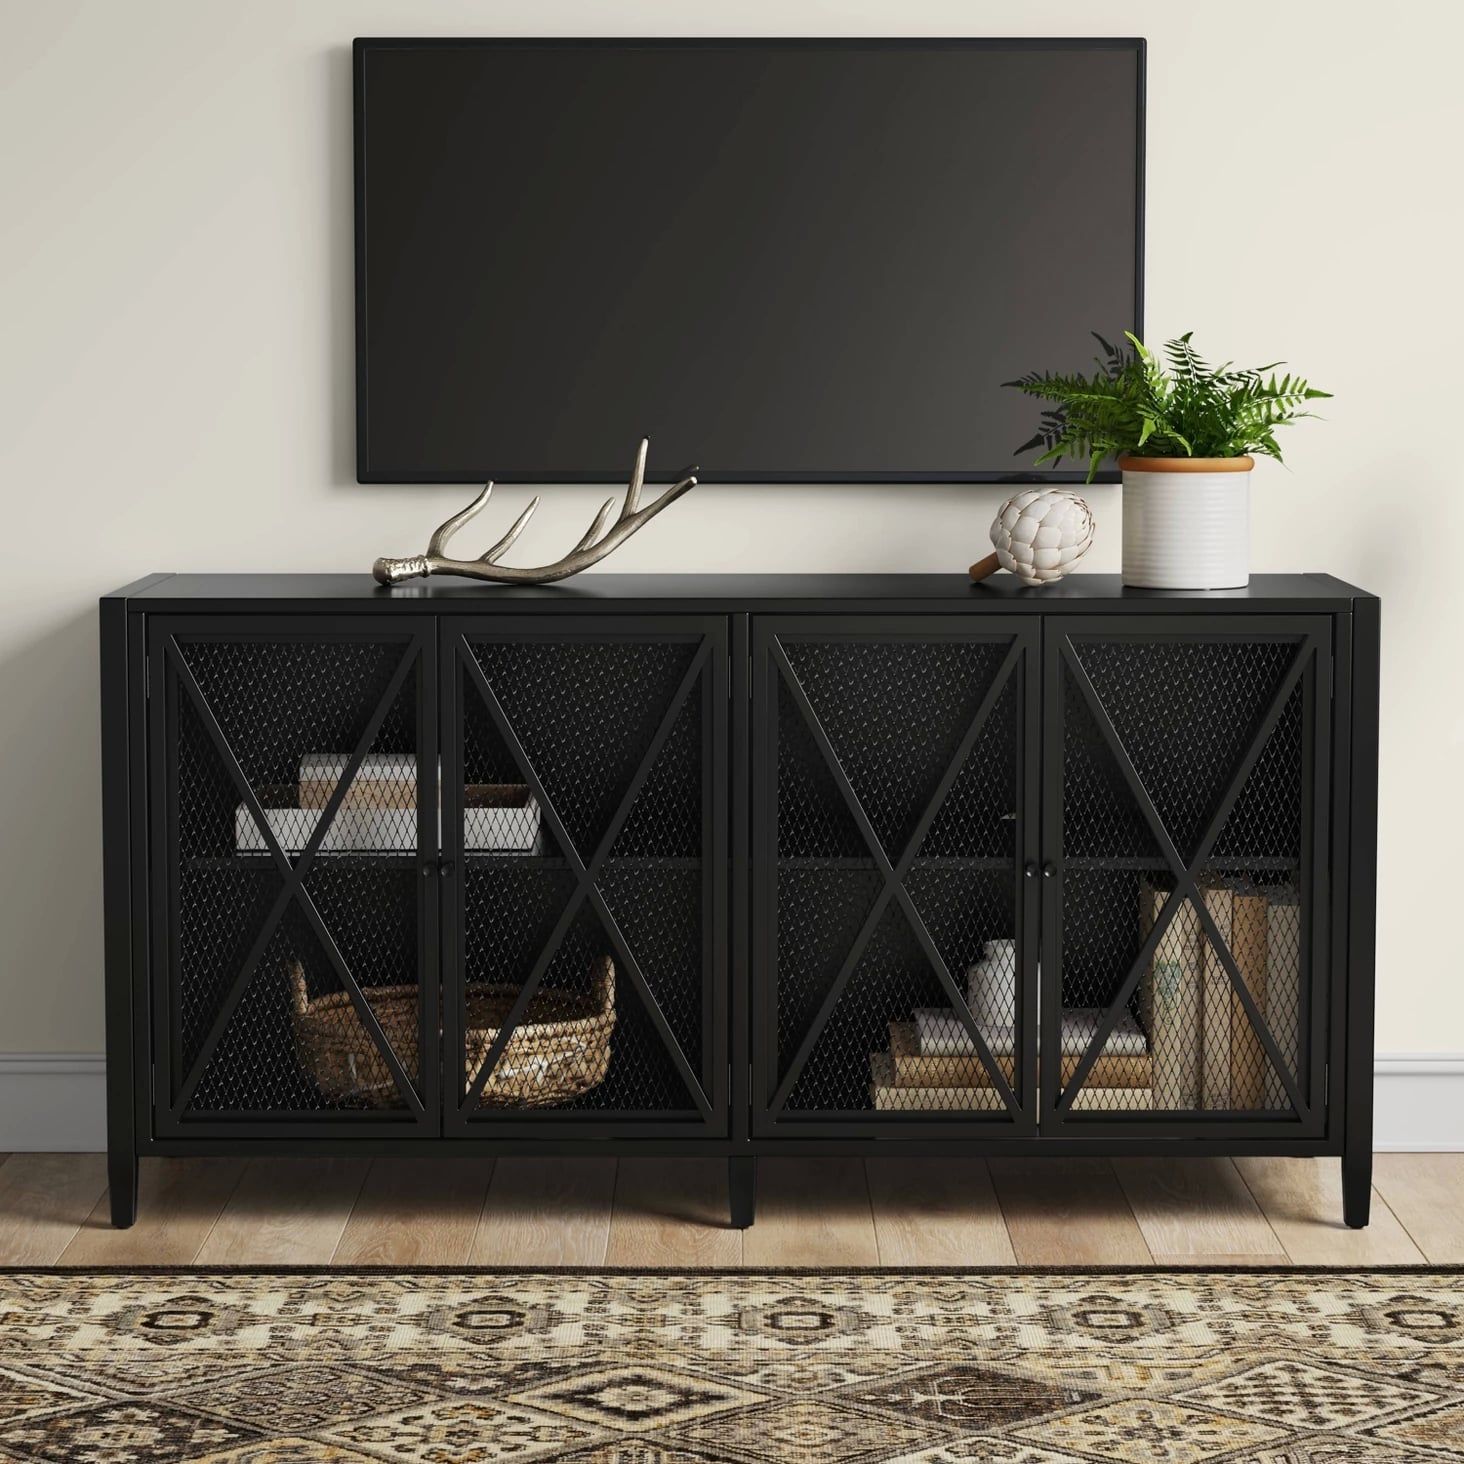 Fairmont Metal Media Stand With Storage | Metal Tv Stand For Tabletop Tv Stands Base With Black Metal Tv Mount (View 10 of 15)